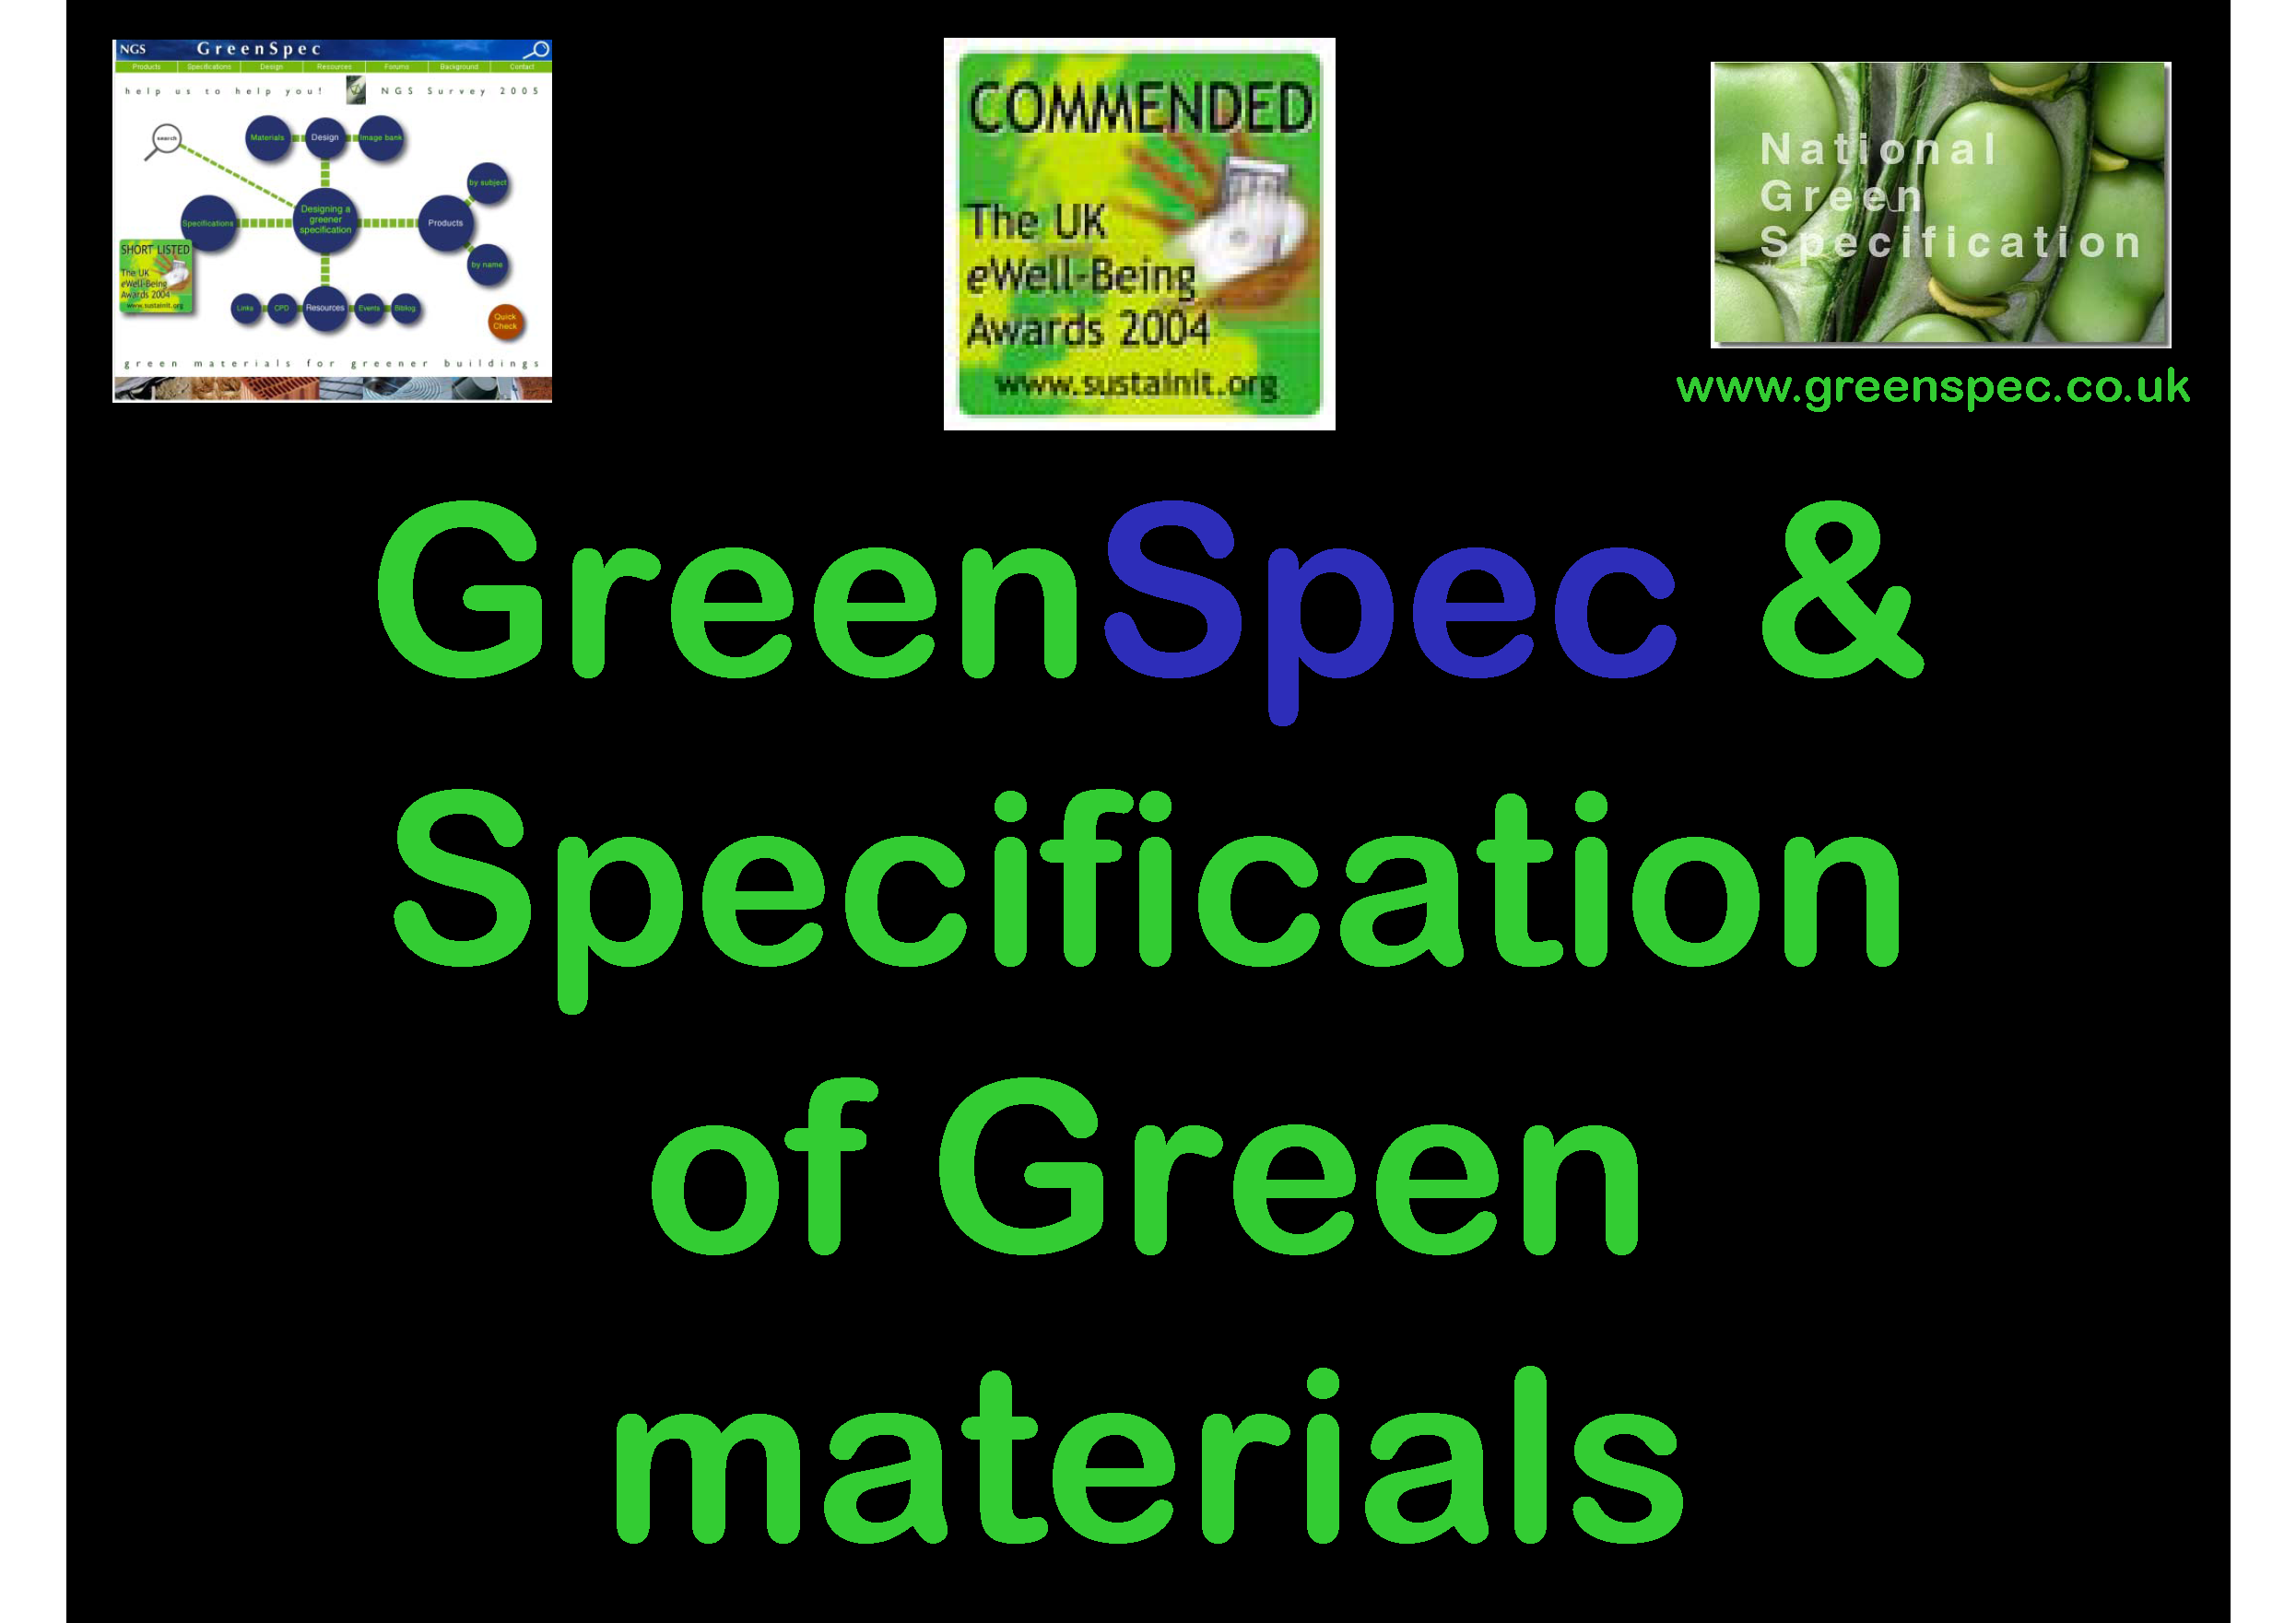 SpecificationGreenMaterials.png